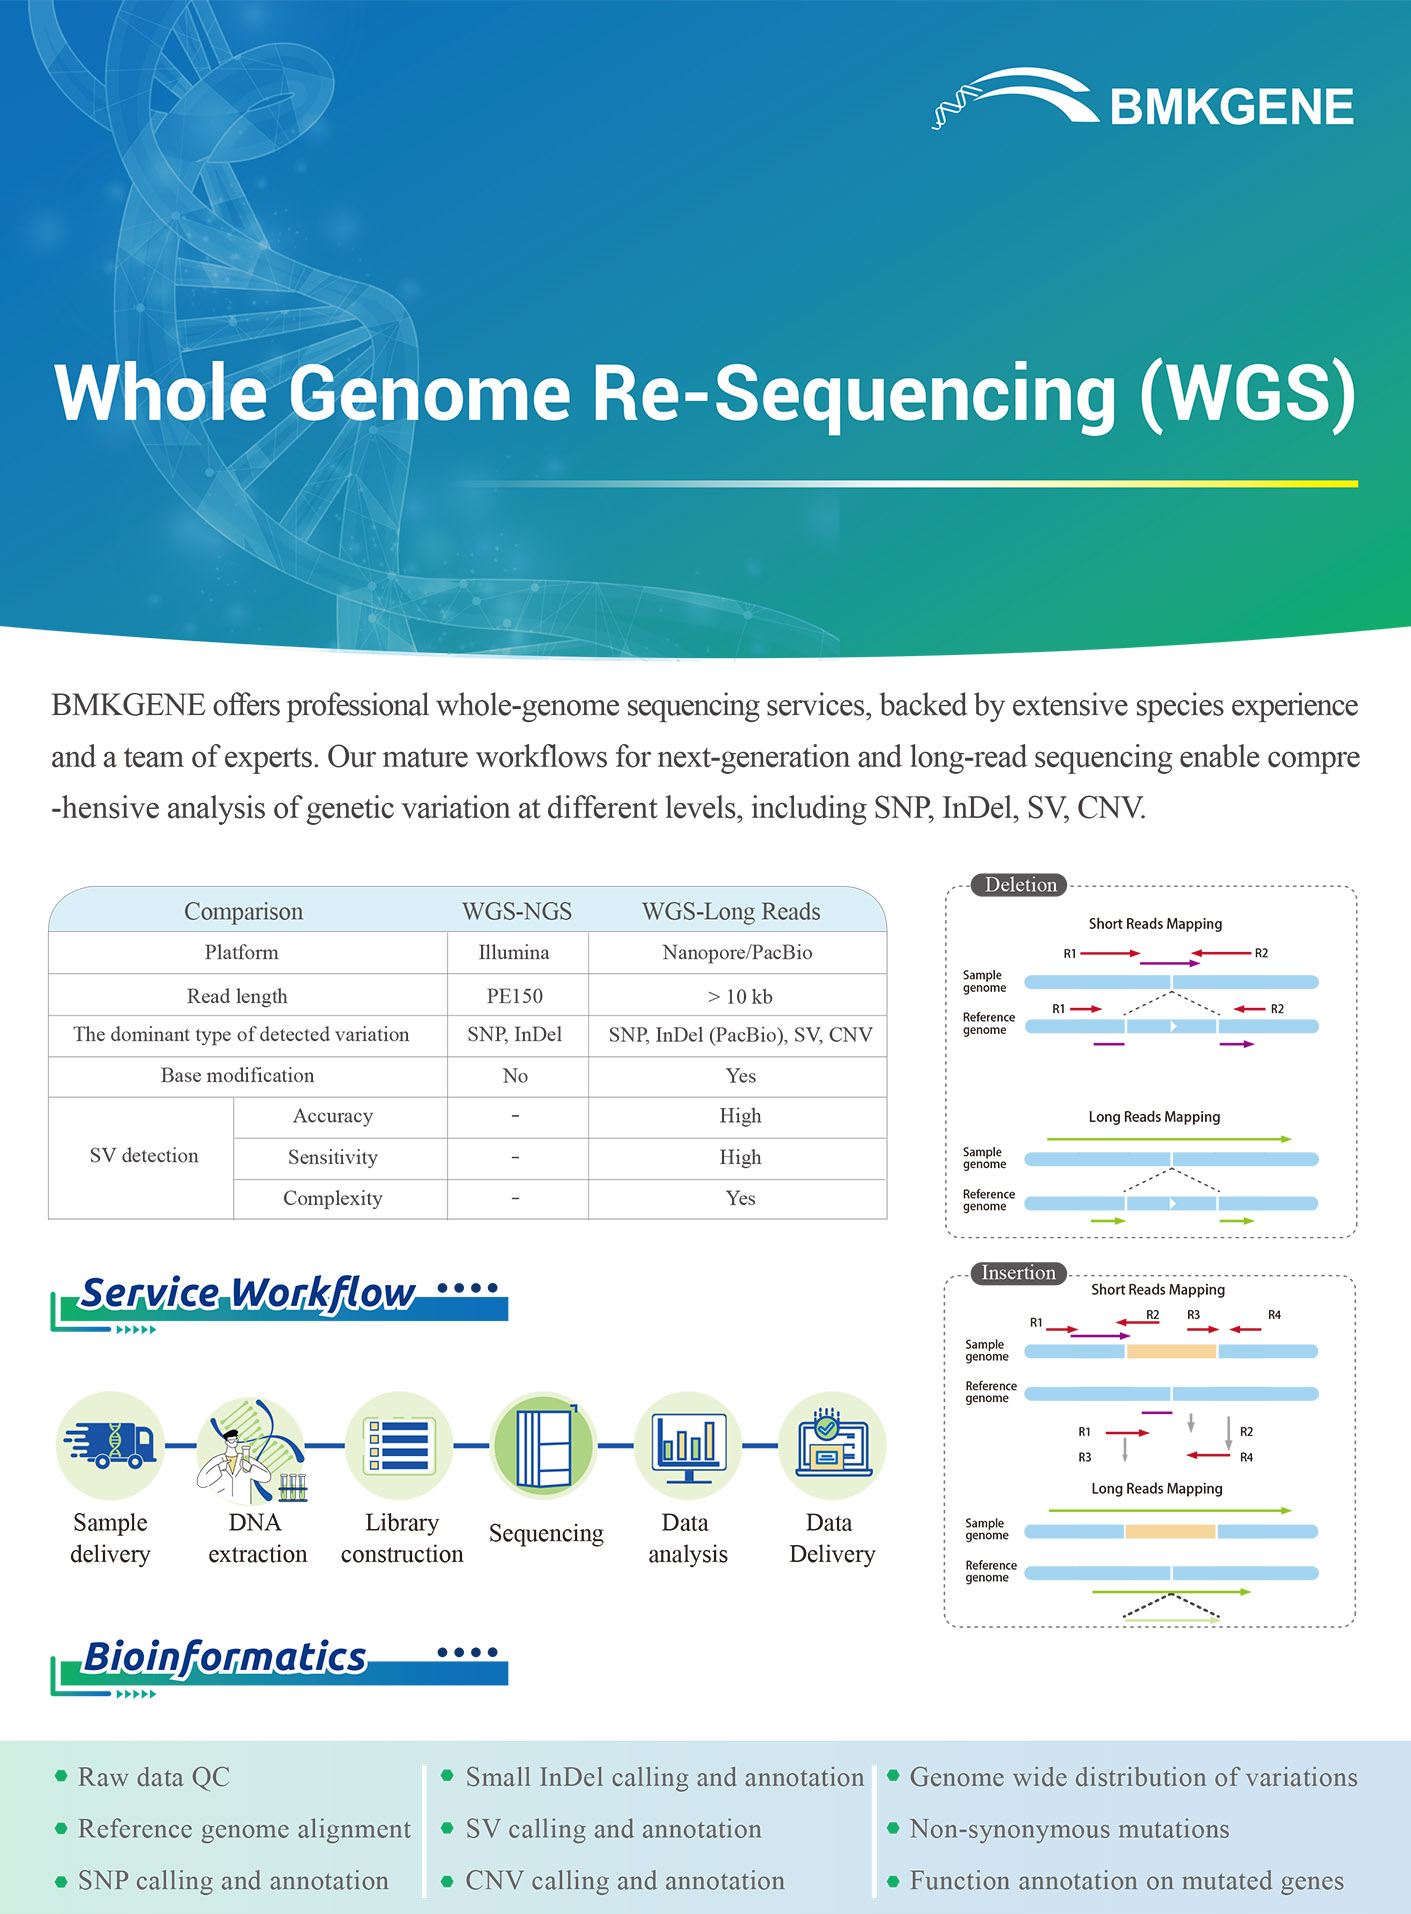 http://www.bmkgene.com/uploads/Plant-and-Animal-Whole-Genome-Re-Sequencing-PA-WGS-BMKGENE-2310.pdf